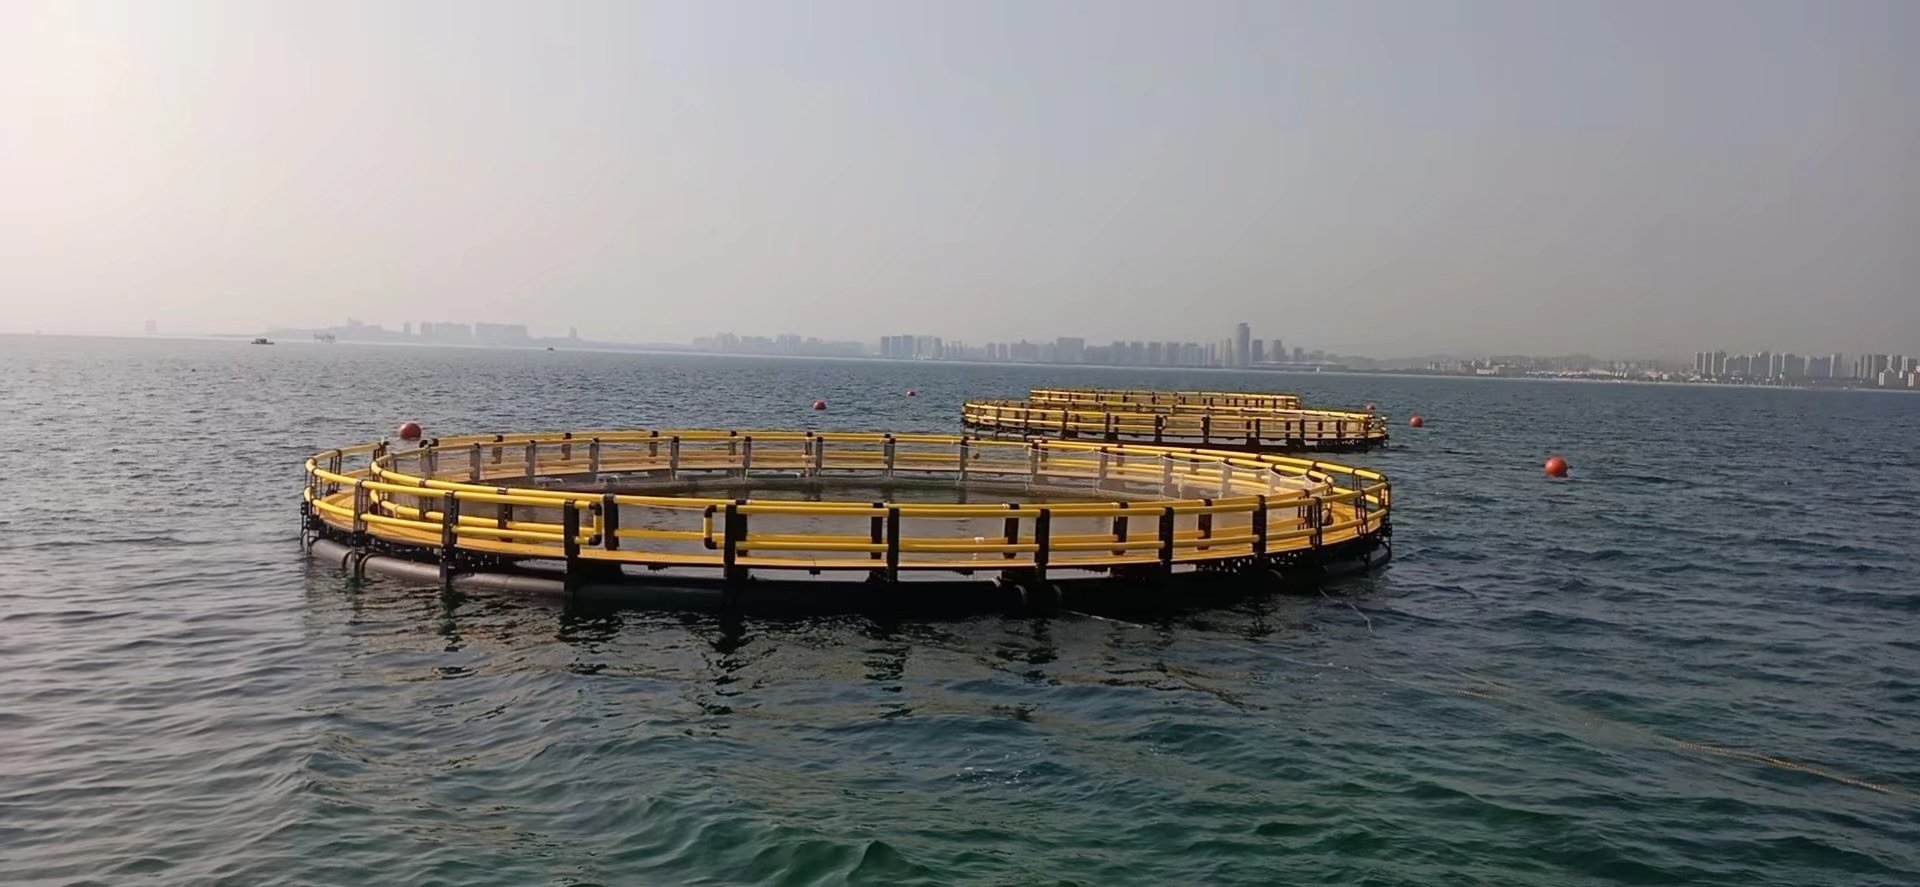 60-meter-long leisure cage in Laishan District, Yantai City